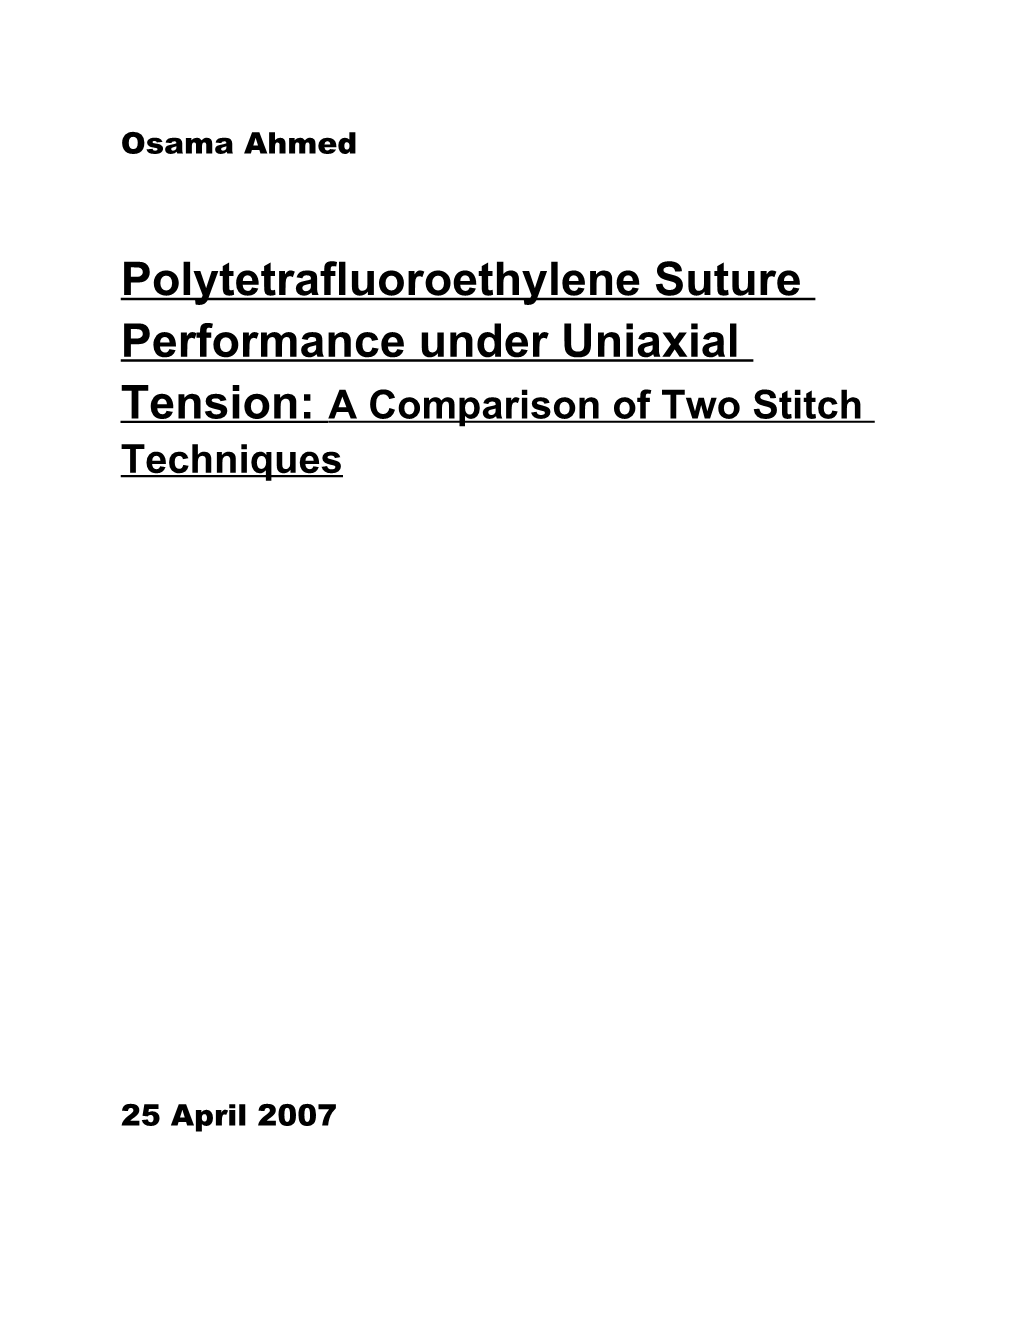 Polytetrafluoroethylene Suture Performance Under Uniaxial Tension: a Comparison of Two